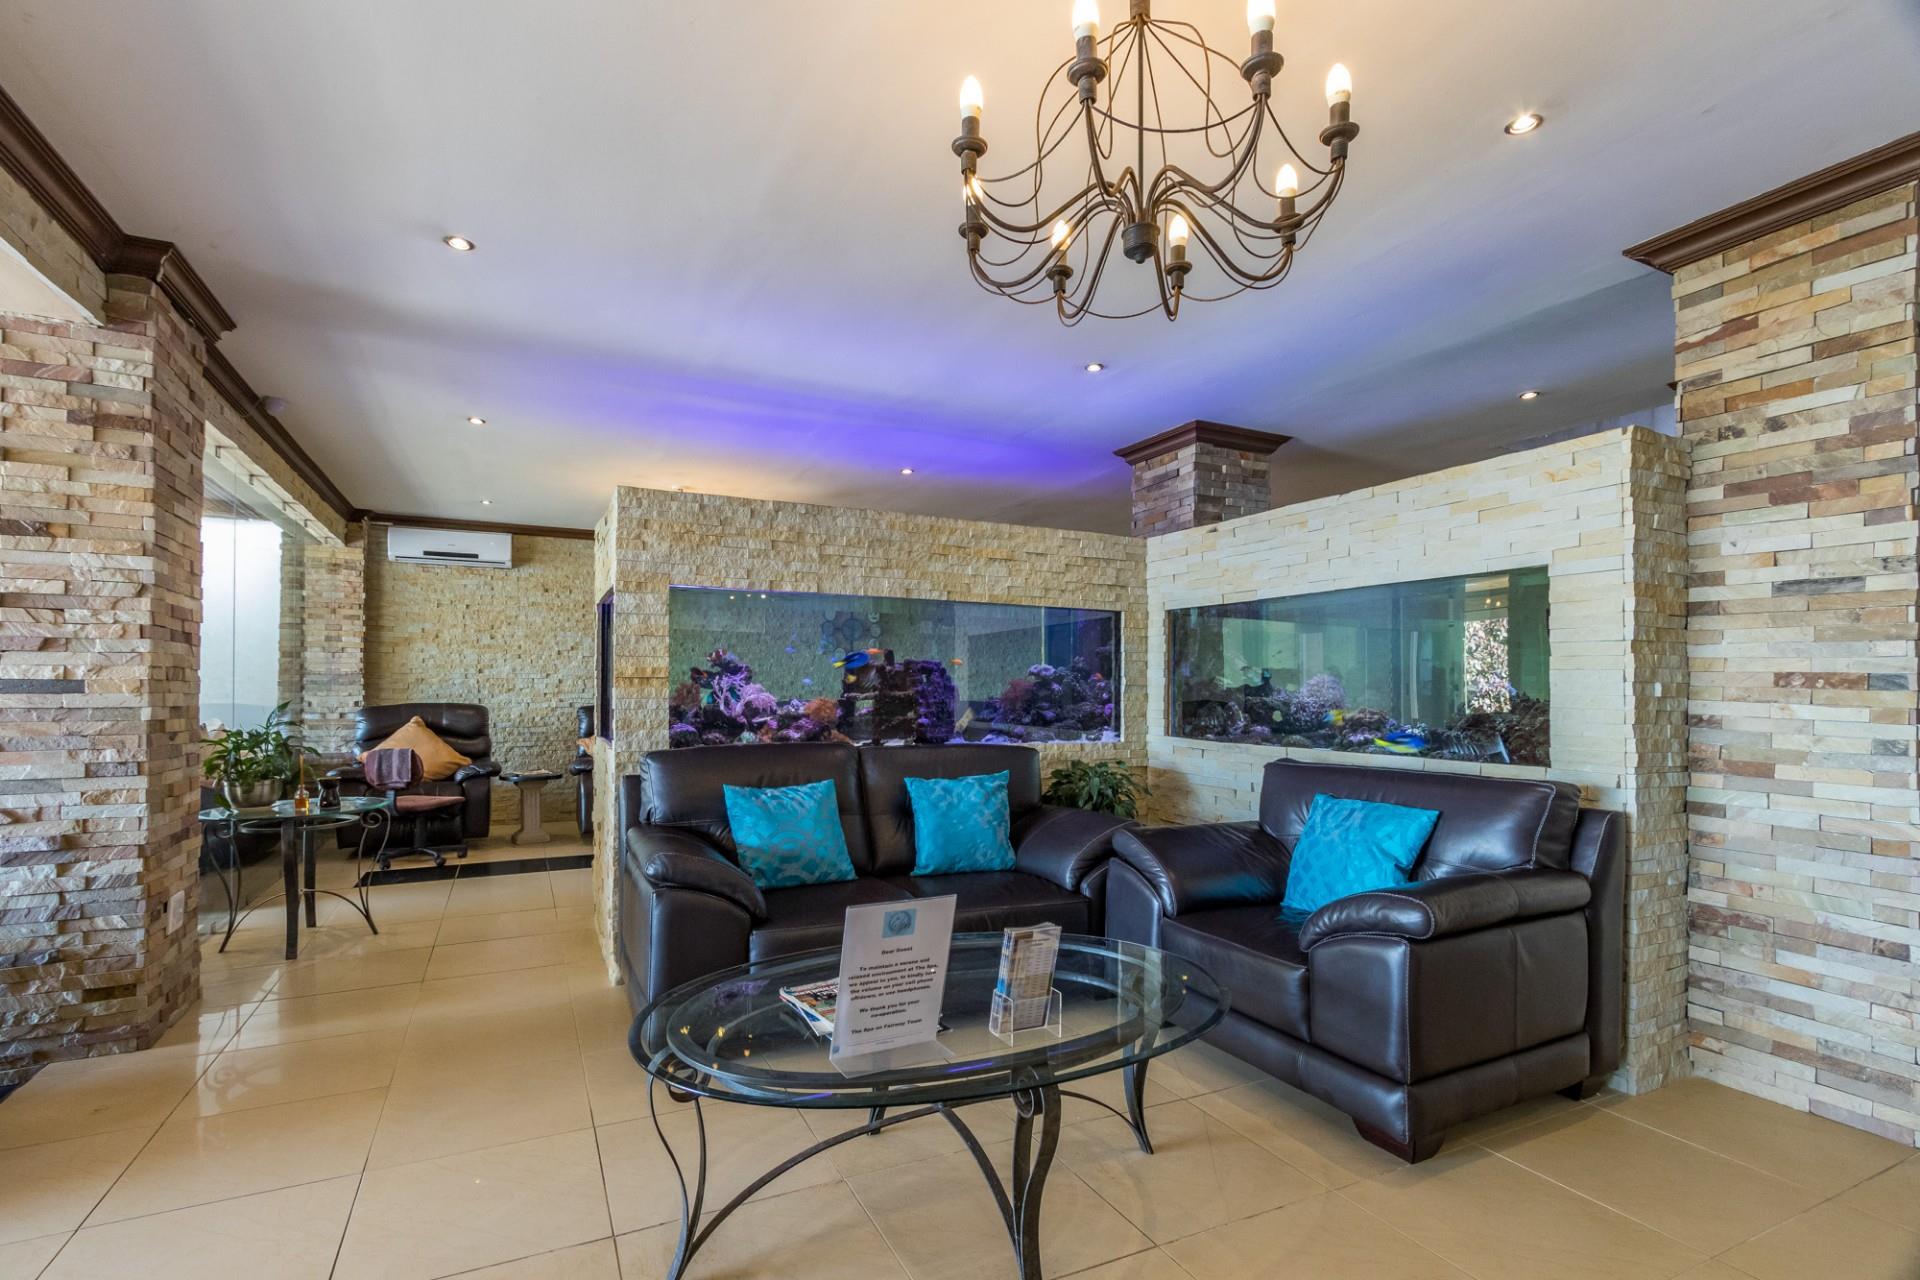 9 Bedroom House For Sale in Durban North | RE/MAX™ of Southern Africa